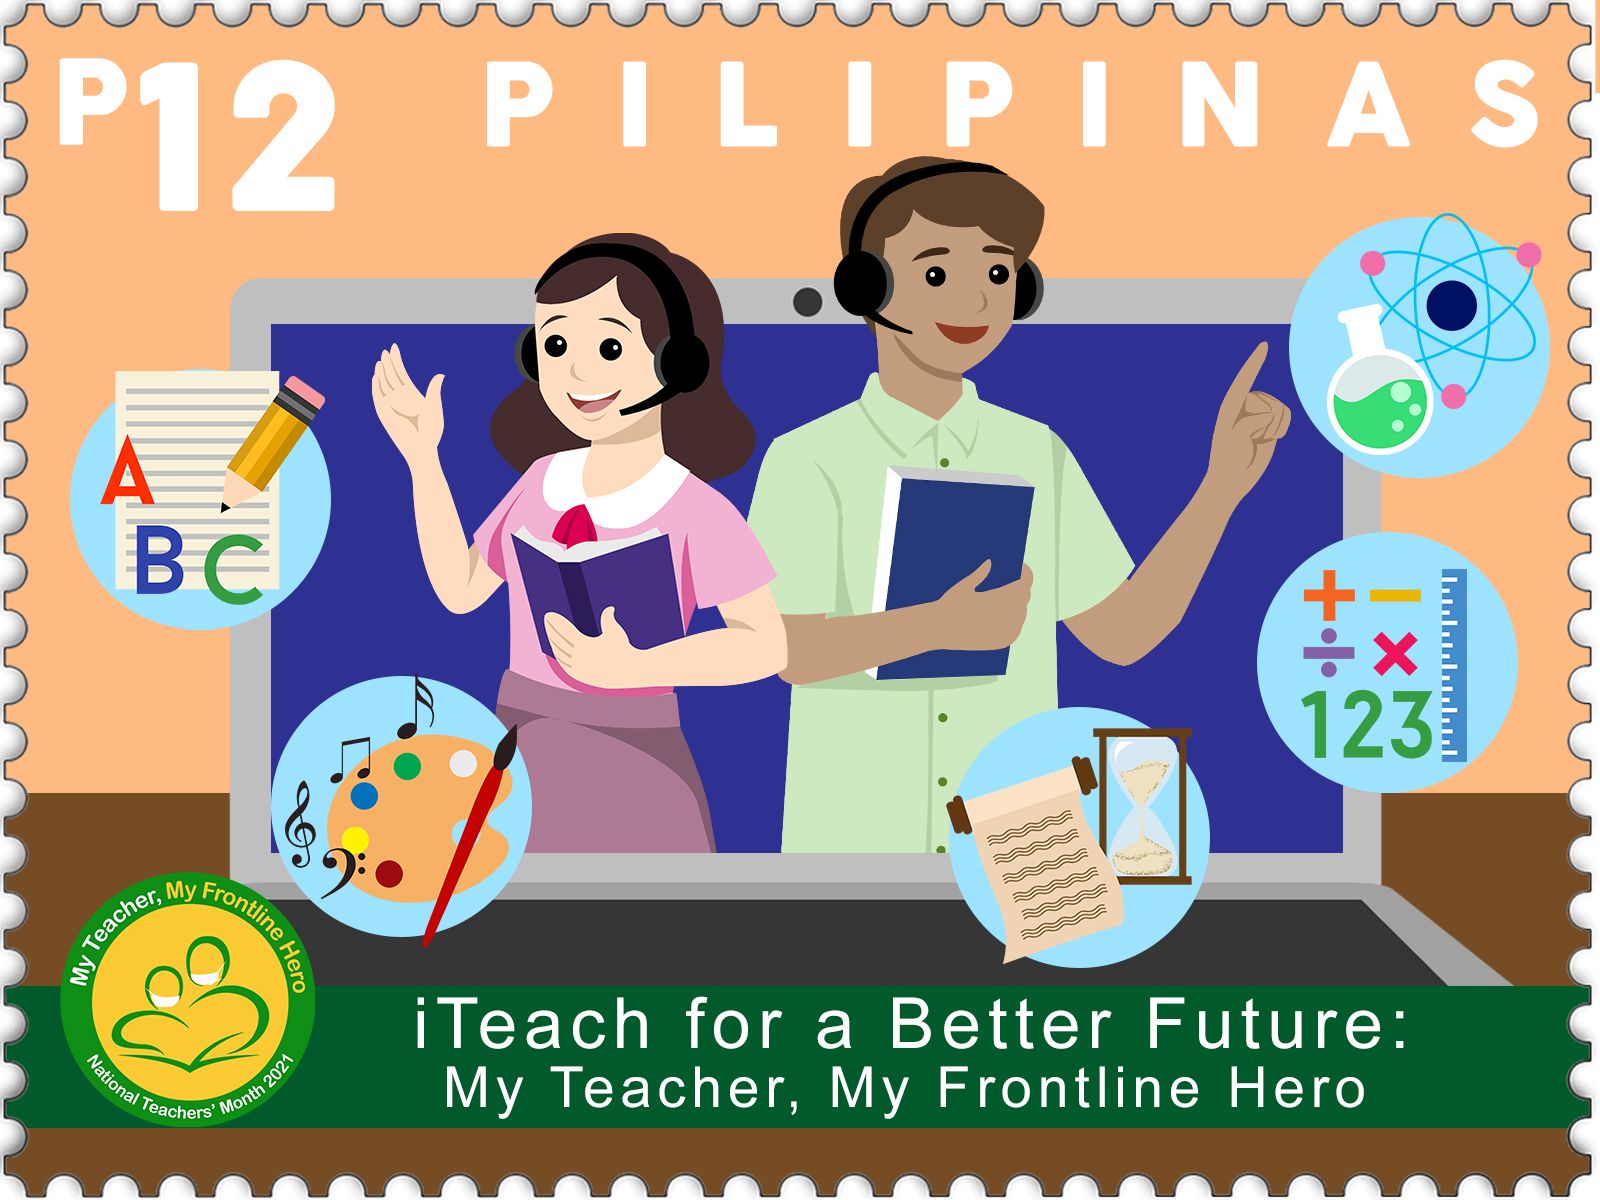 Stamps issued to mark 2021 Nat’l Teachers’ Month Philippine News Agency